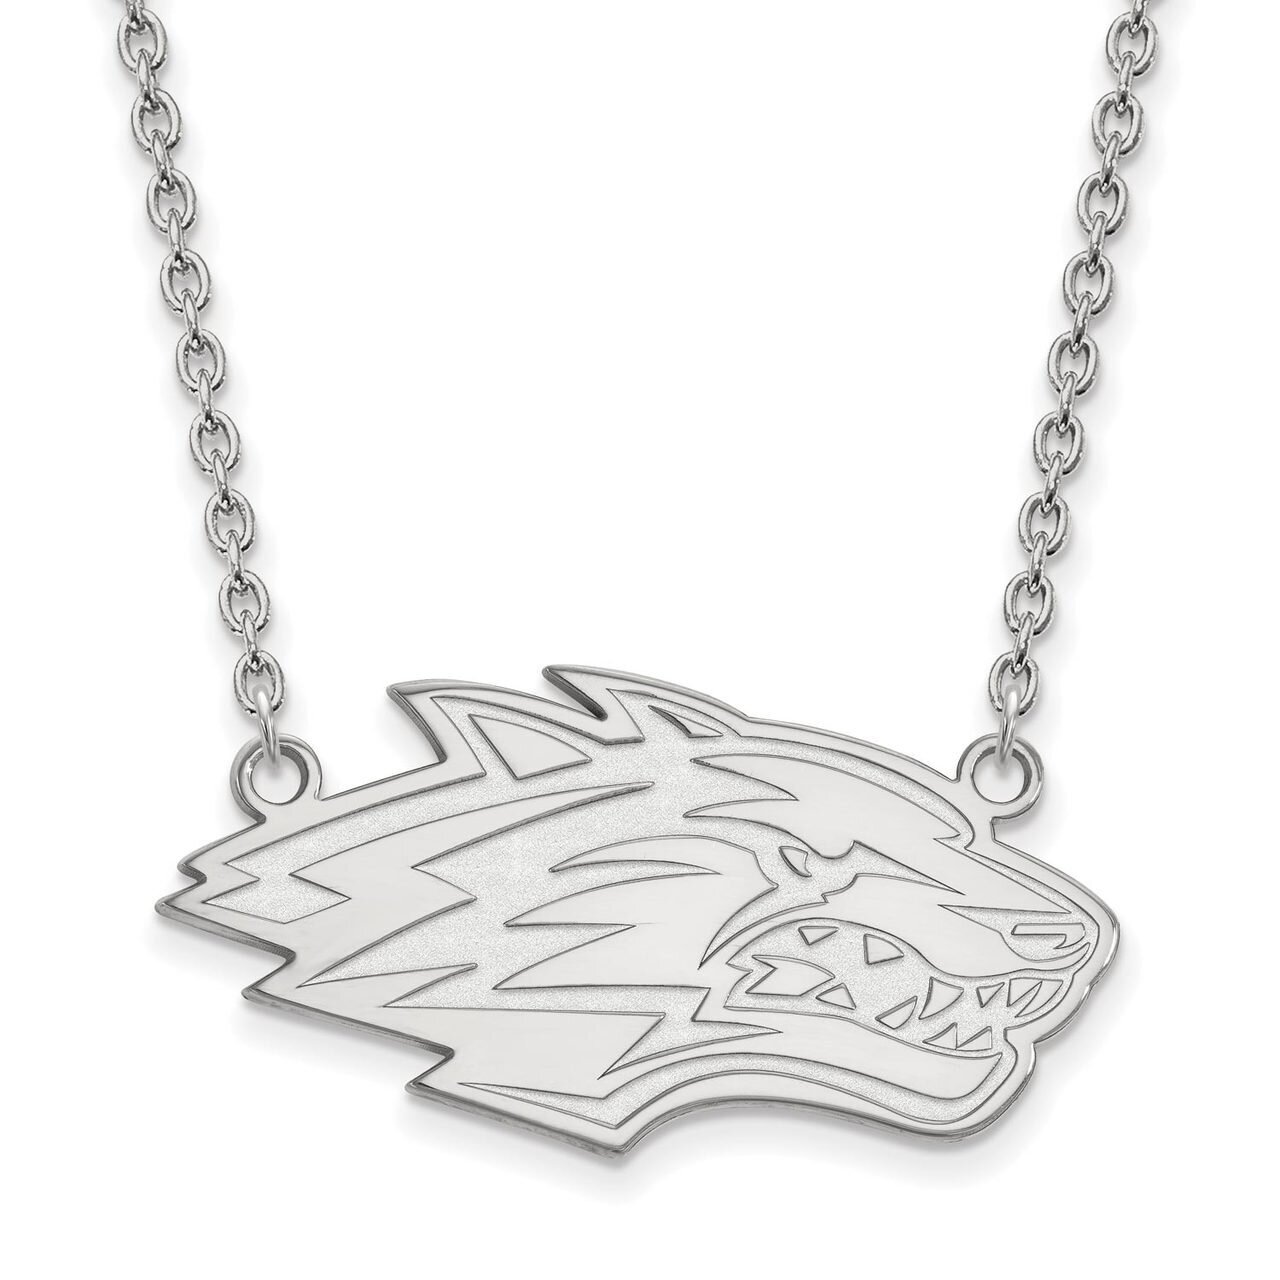 University of New Mexico Large Pendant with Chain Necklace 14k White Gold 4W009UNM-18